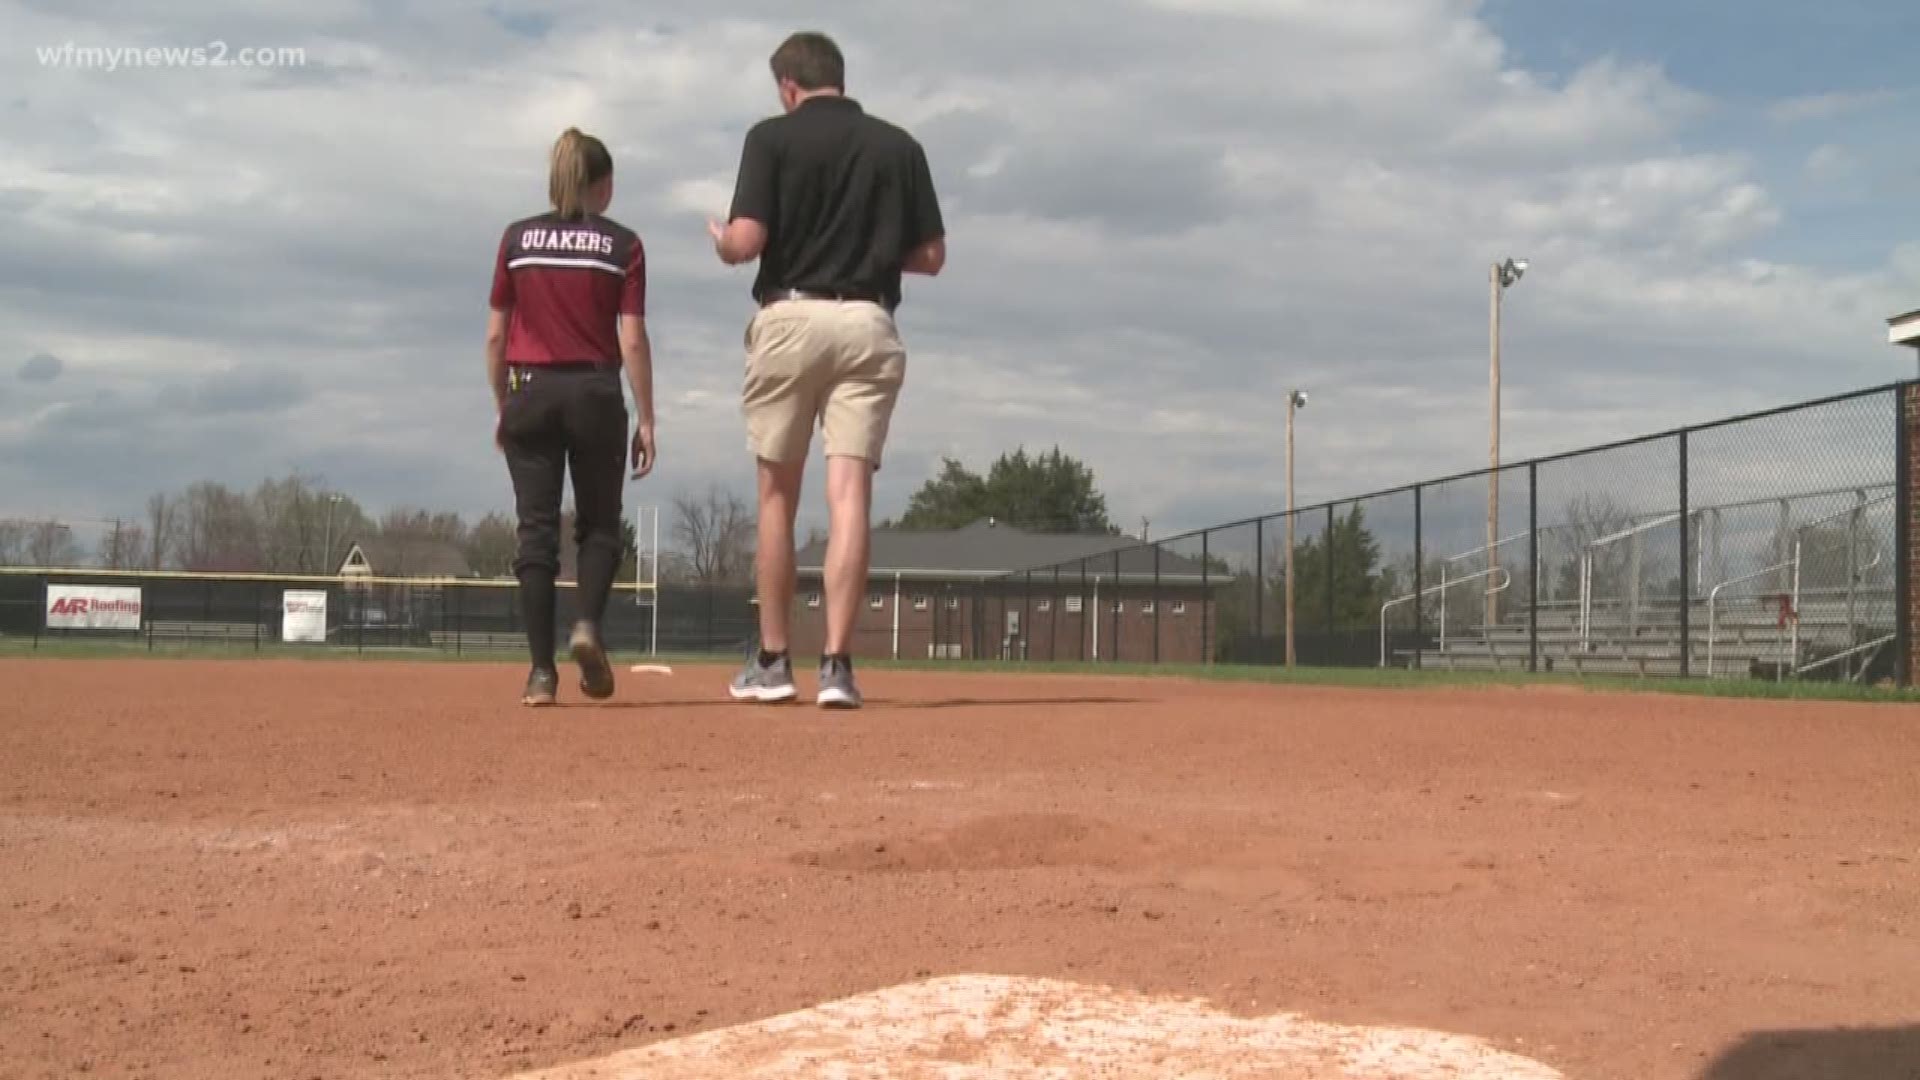 Each day the reality sinks in a bit more for senior student athletes. It's no different for a Guilford College softball player.